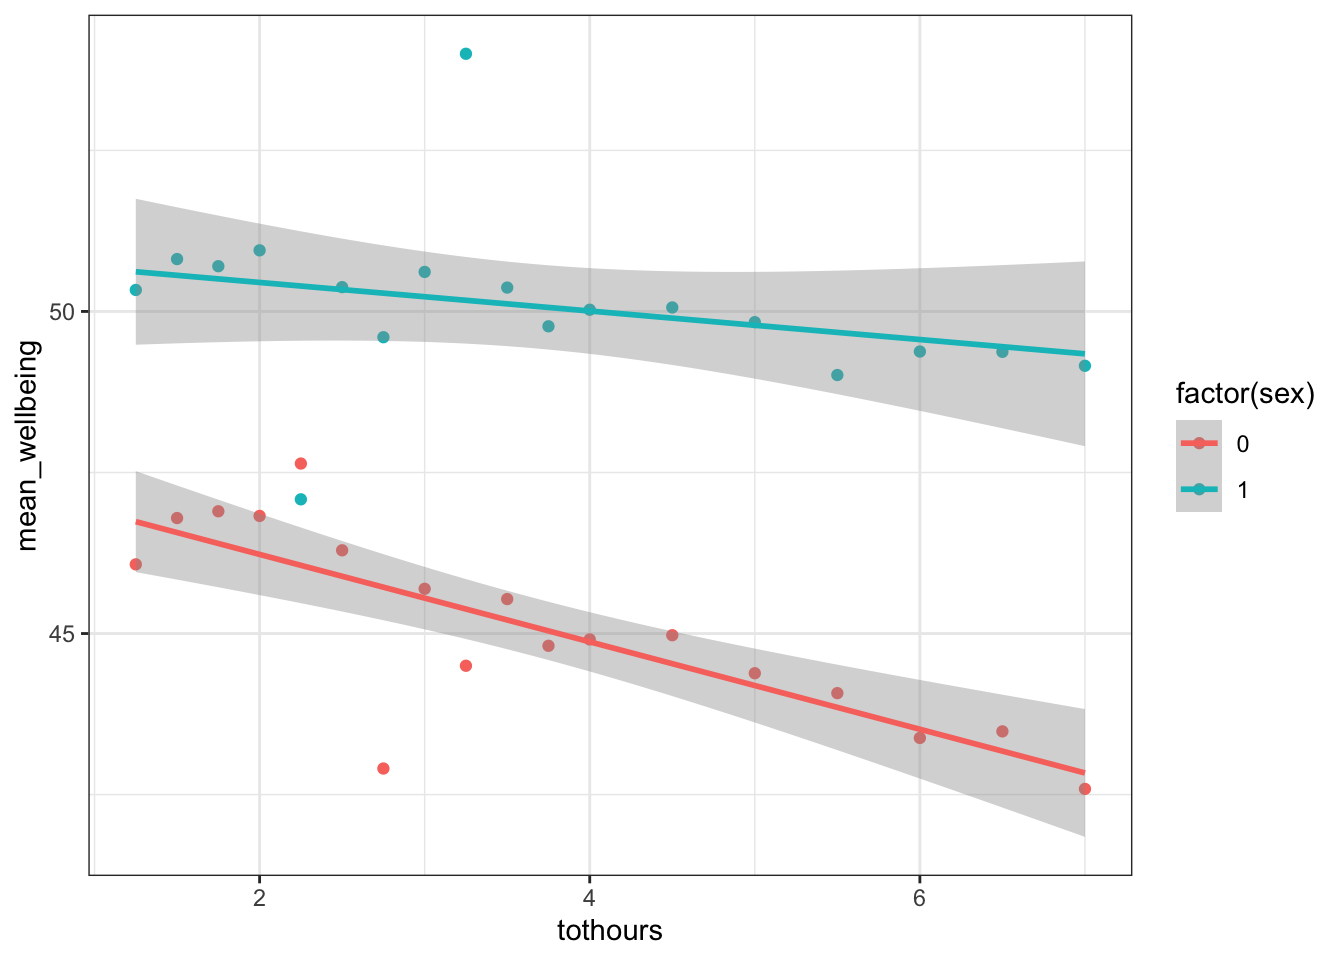 Scatterplot and slopes for relationships between total hours and mean wellbeing score for boys (cyan) and girls (red)